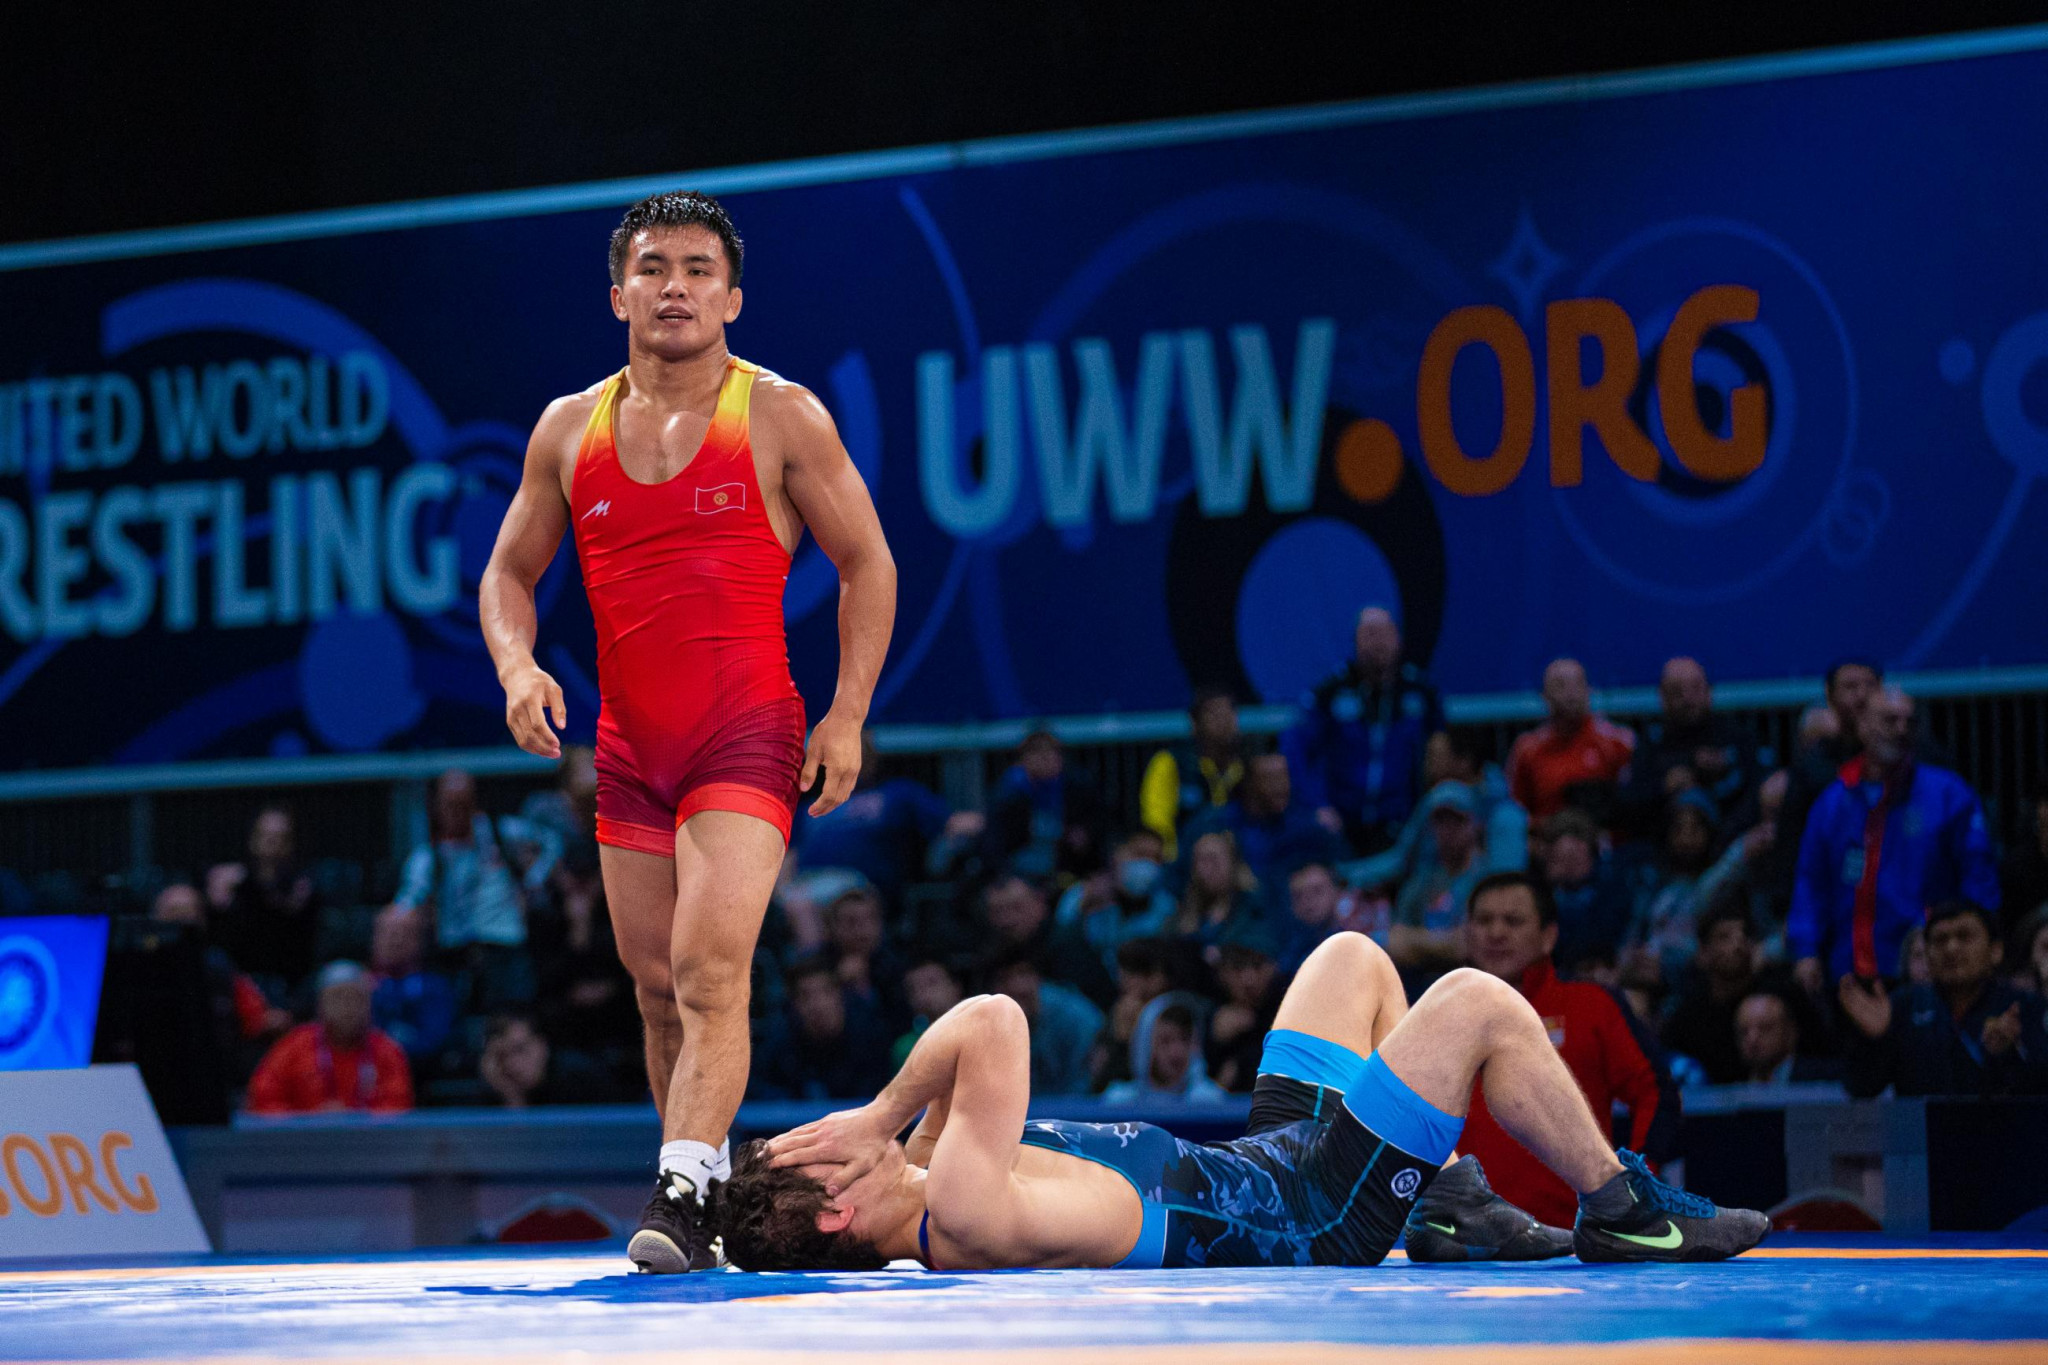 Ernazar Akmataliev, red, defeated Vazgen Tevanyan to claim UWW U23 gold in the 70kg division ©UWW